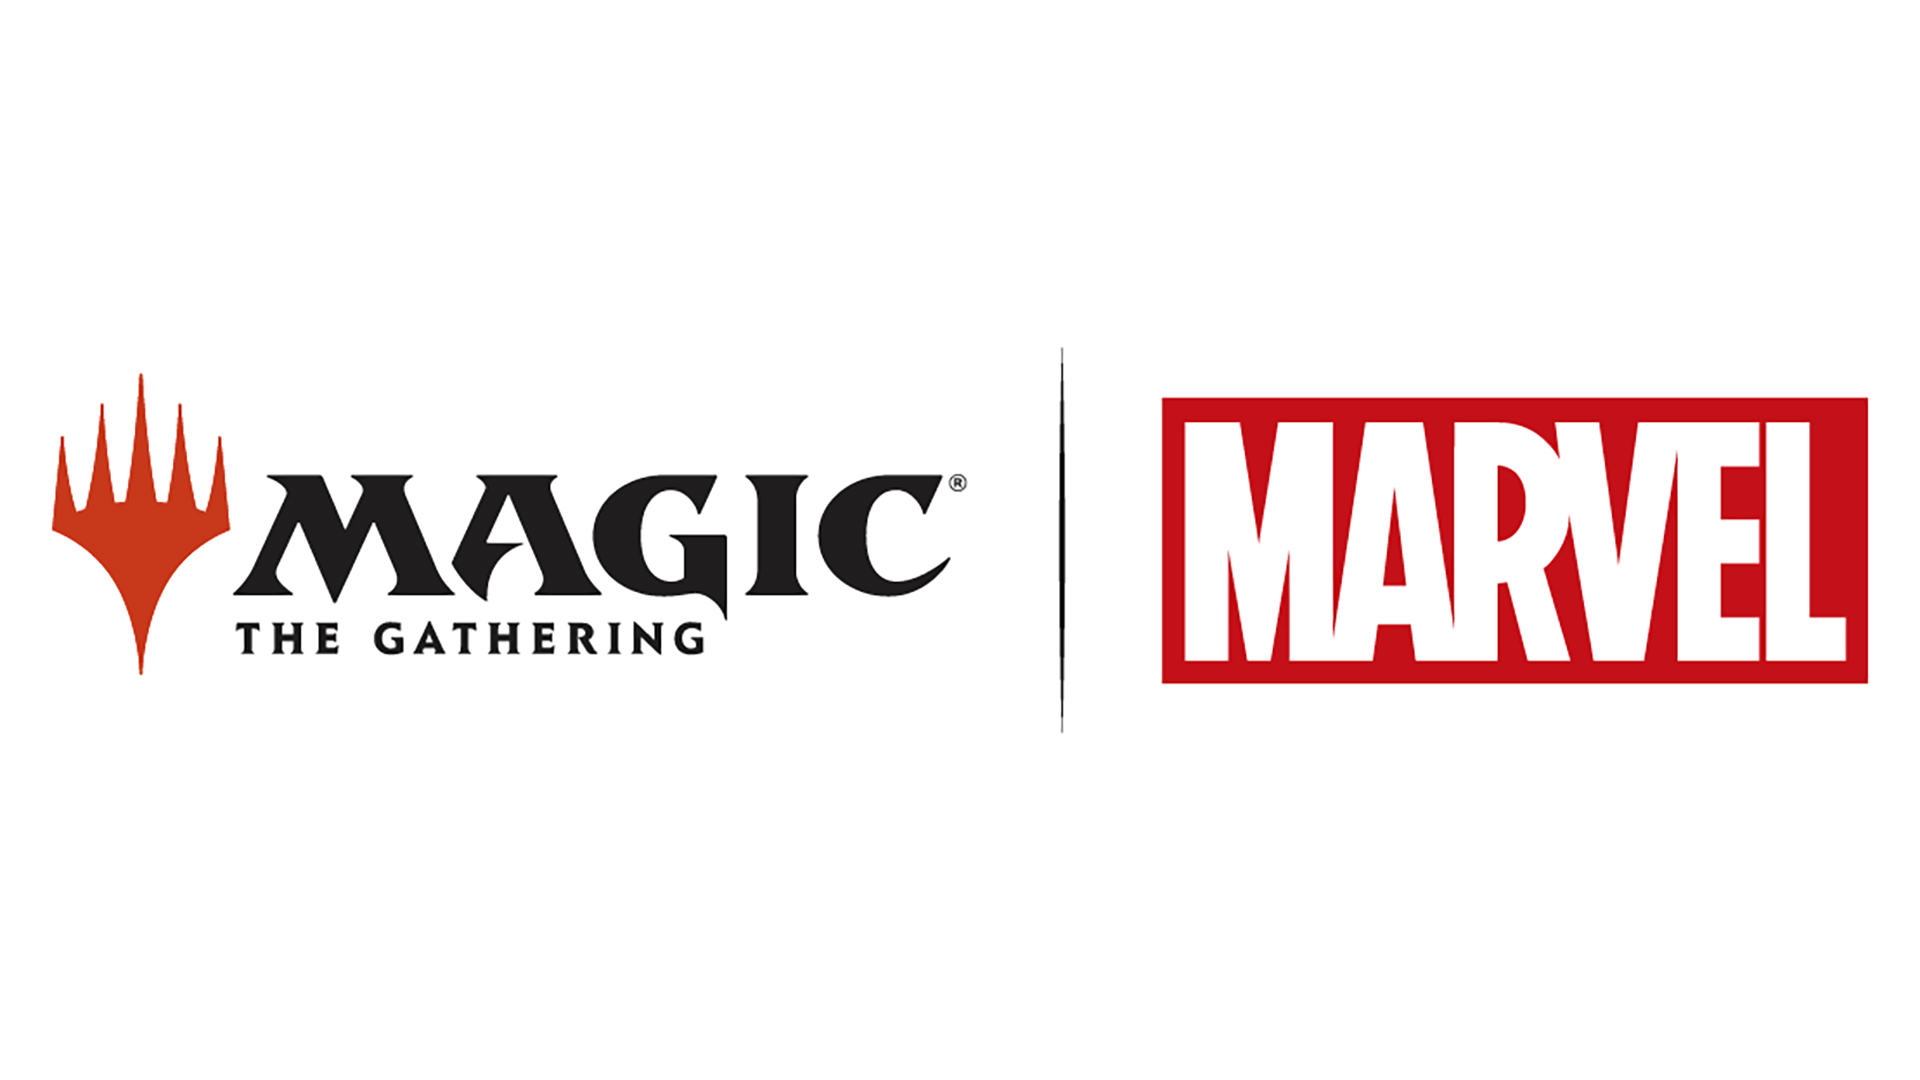 Magic: The Gathering  Official site for MTG news, sets, and events